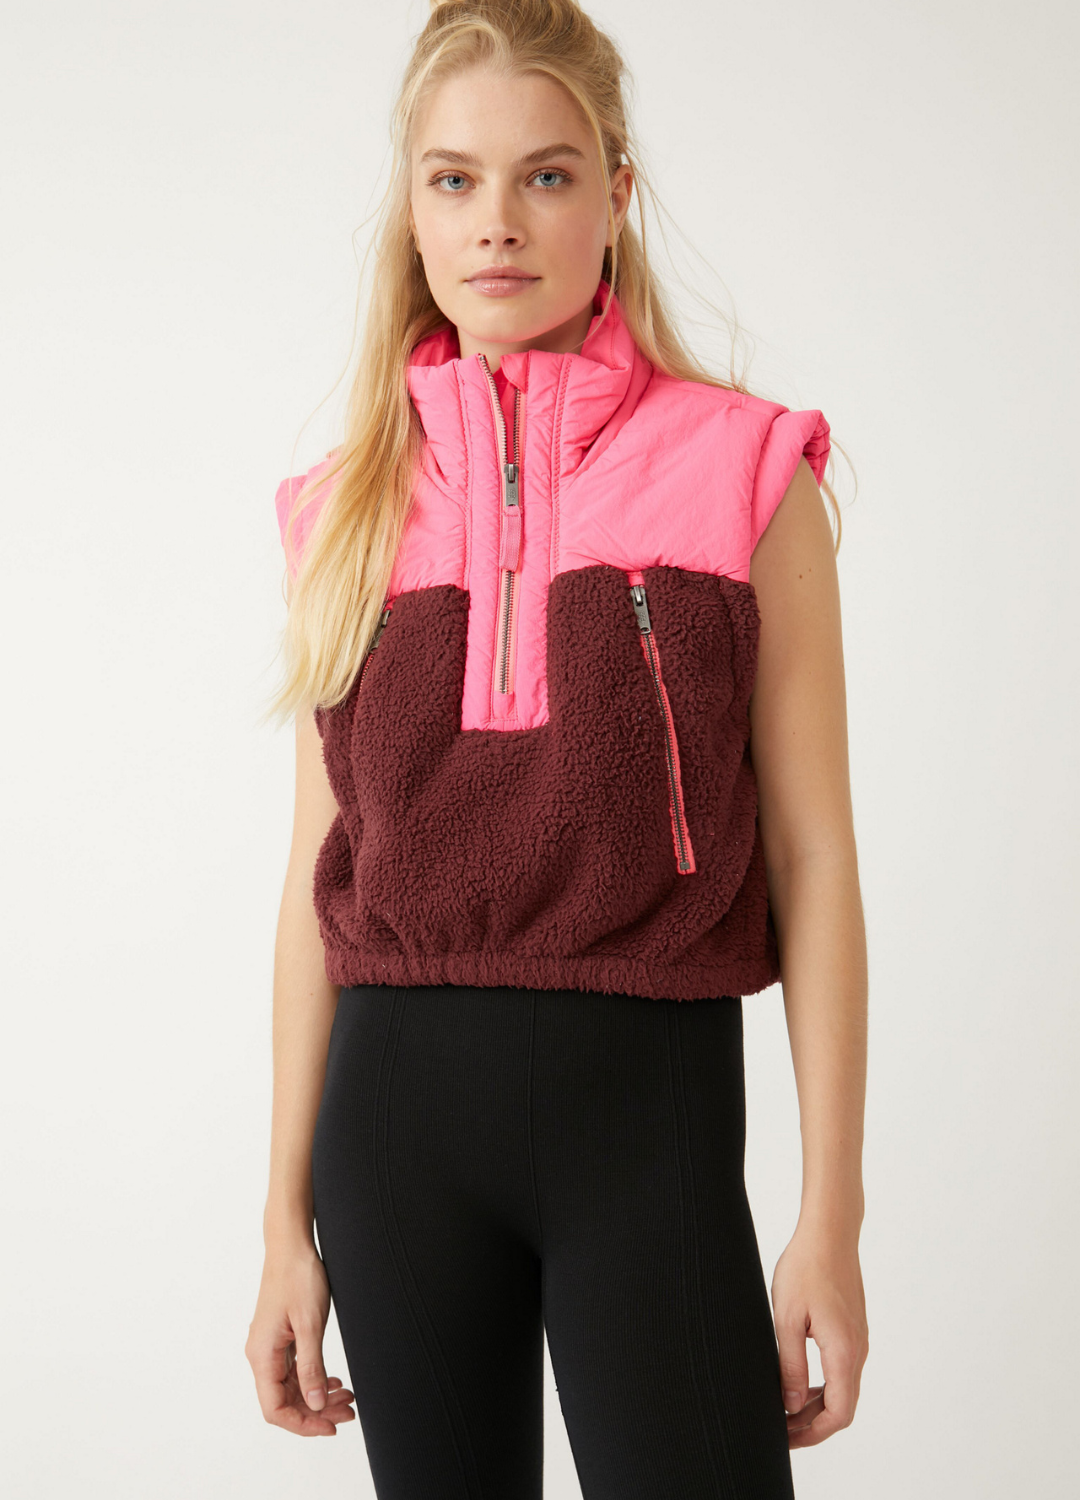 Journey Ahead Vest in Pomegranate Combo